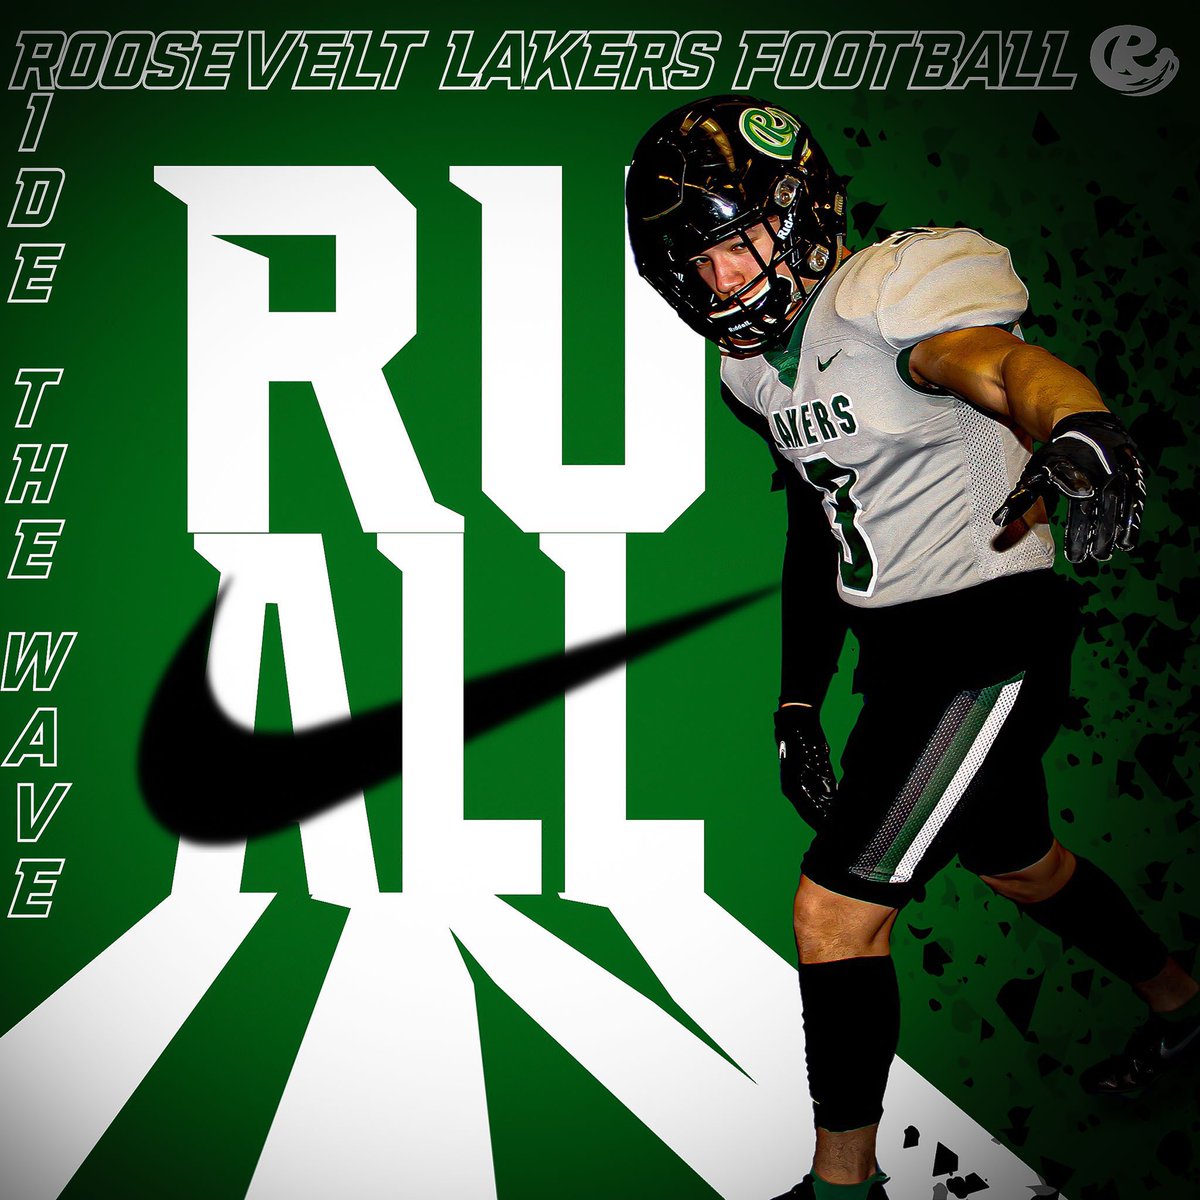 I am honored and blessed to receive a scholarship to Roosevelt University to continue my academic and athletic career #AT2G #Lakeshow @CoachPeeps @CoachAWhite @coachjudeoliva1